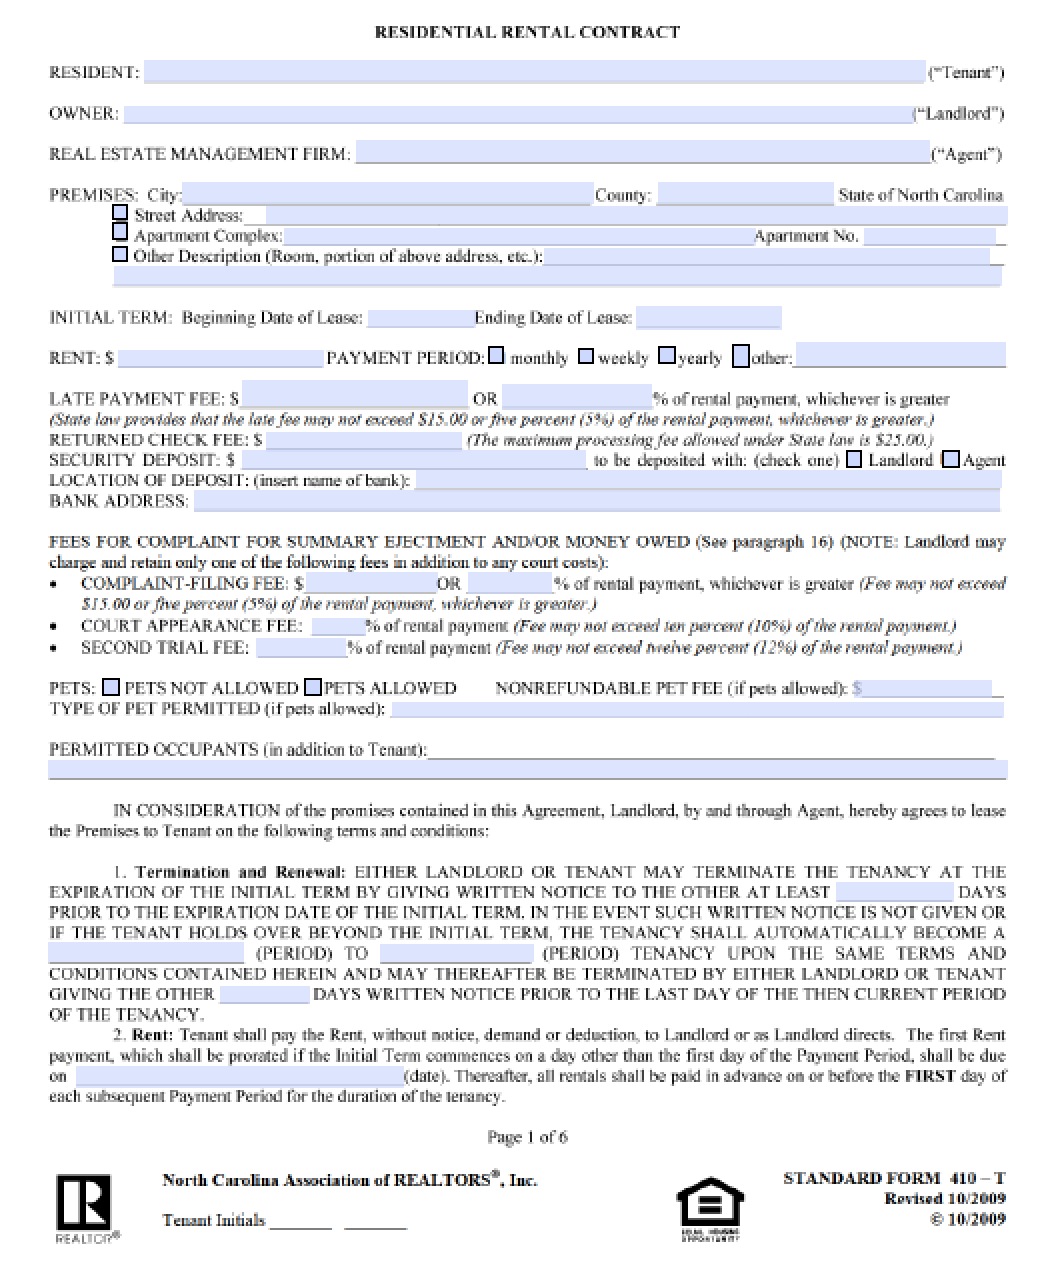 Free North Carolina Rental Lease Agreement Templates  PDF  Word In yearly rental agreement template